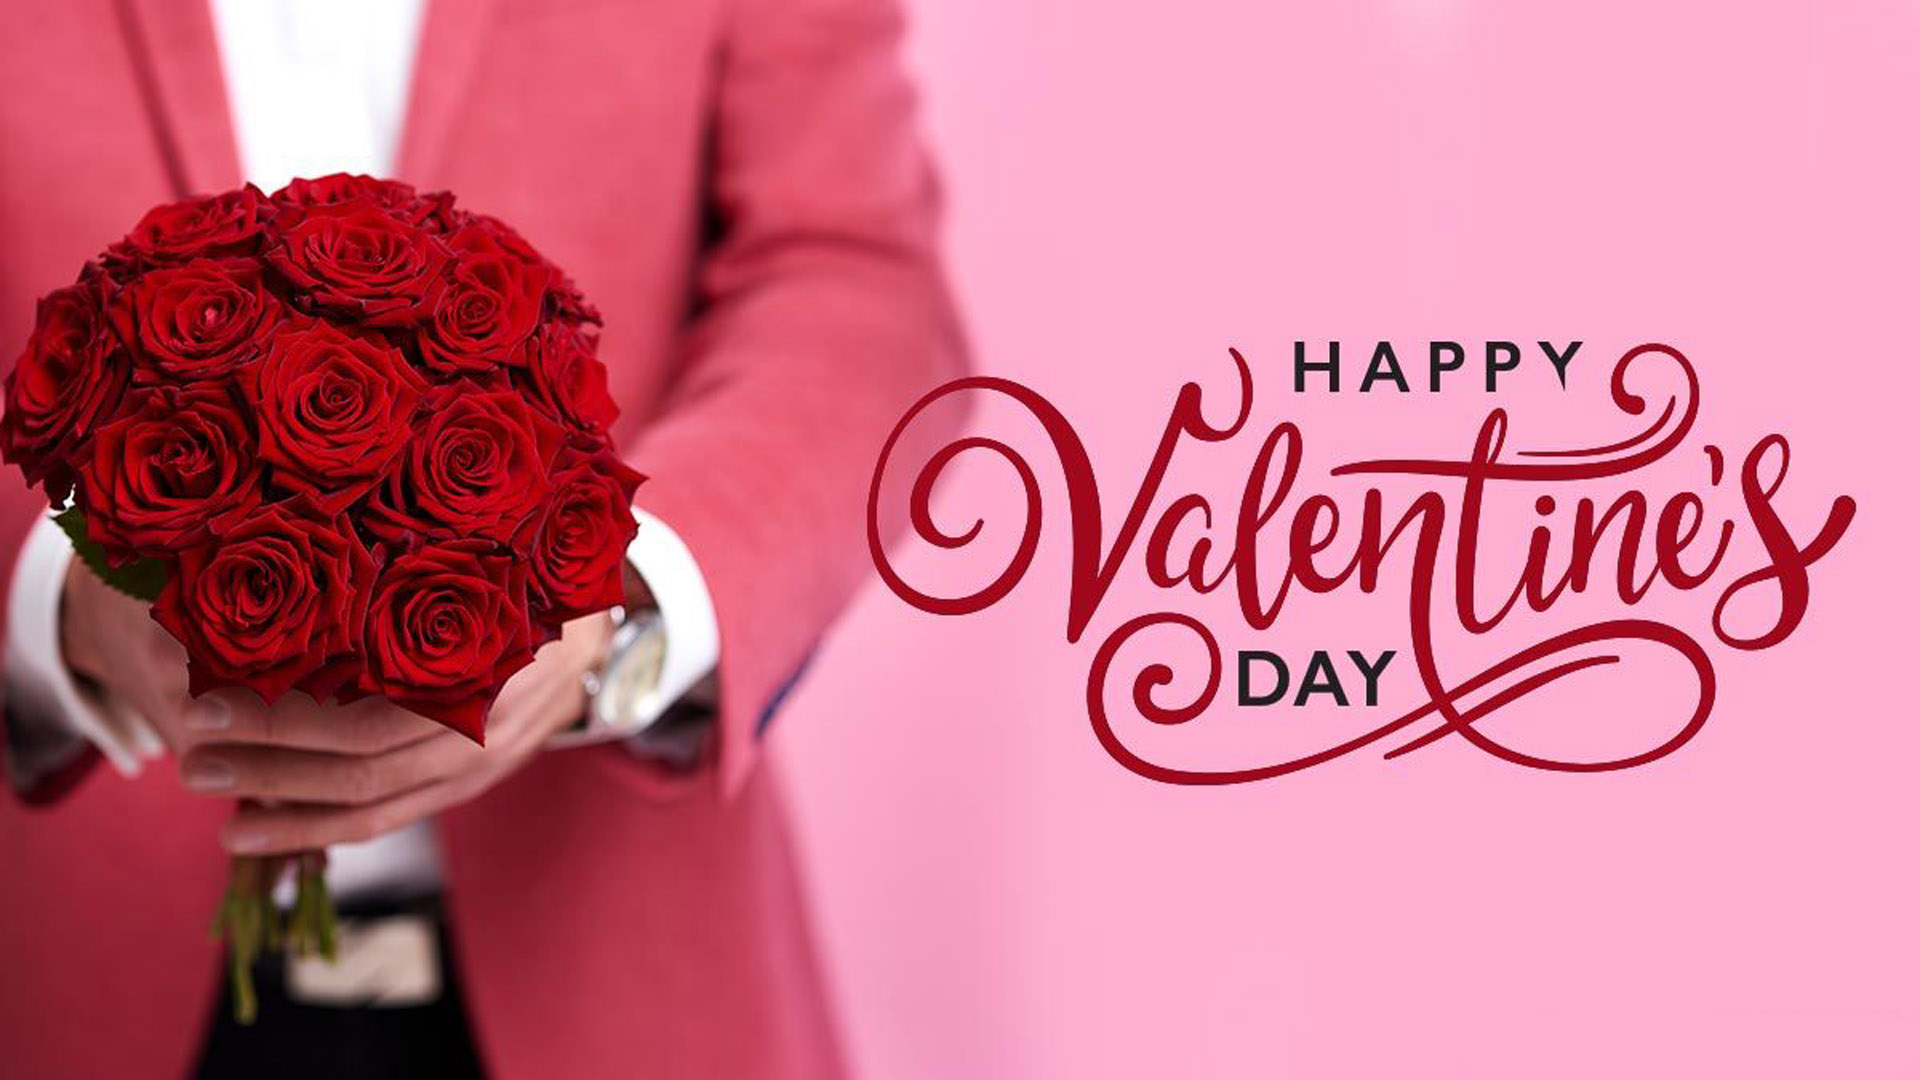 Happy Valentines Day Quotes wishes images messages to your loved ones :  